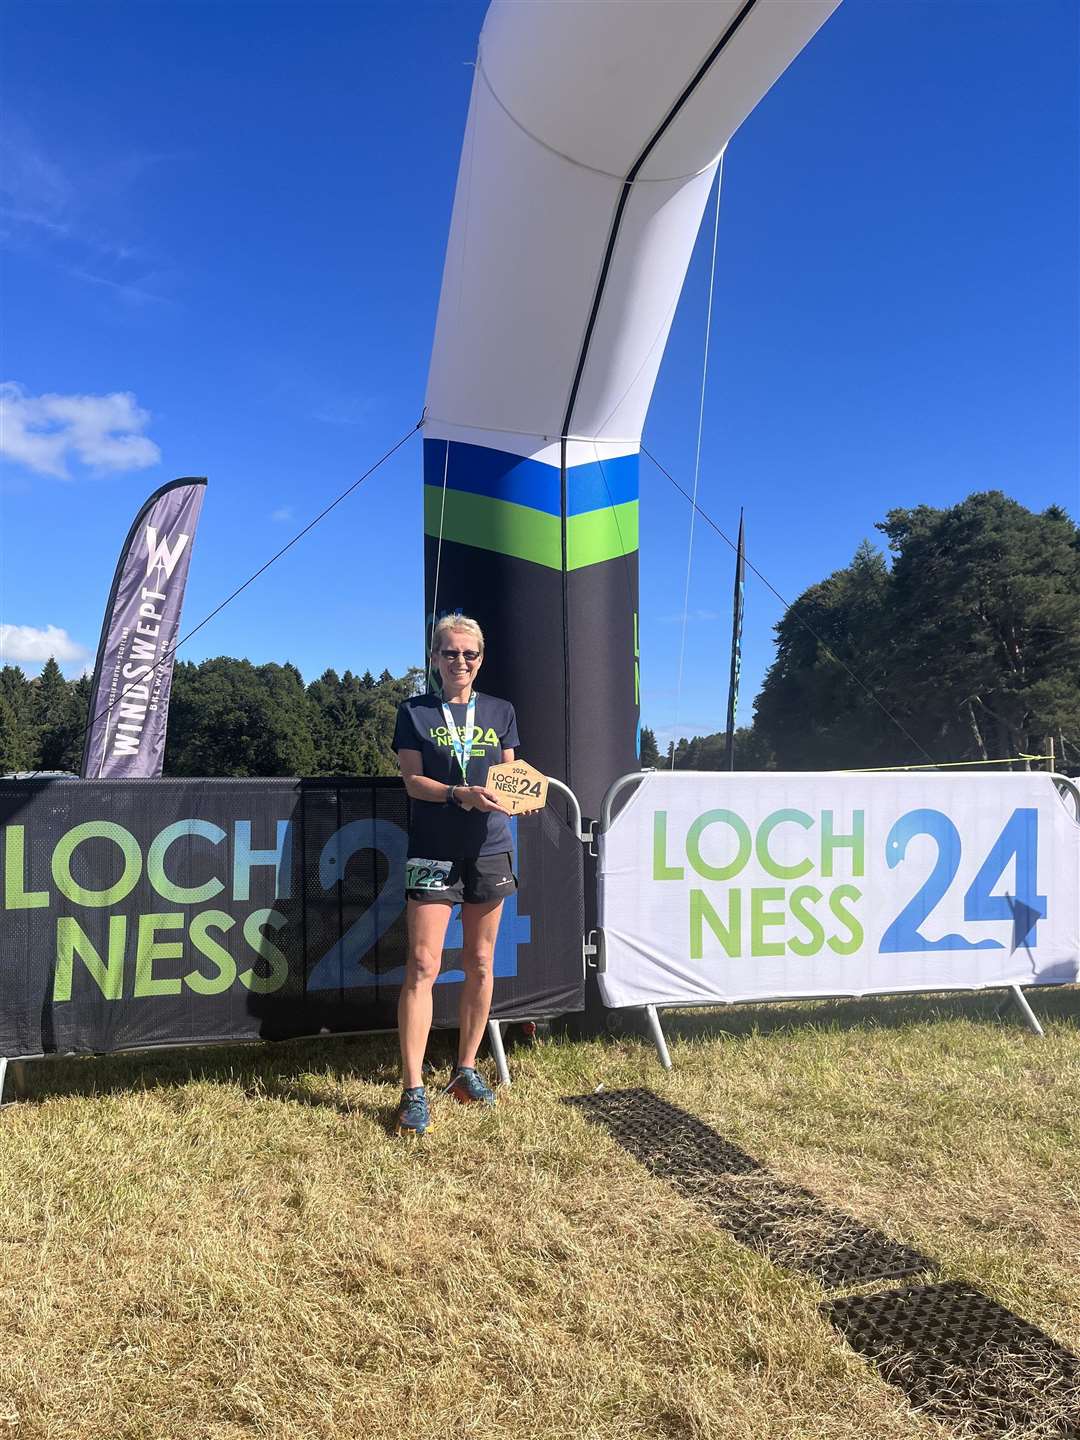 Angela Davidson won the solo female category at the Loch Ness 24.